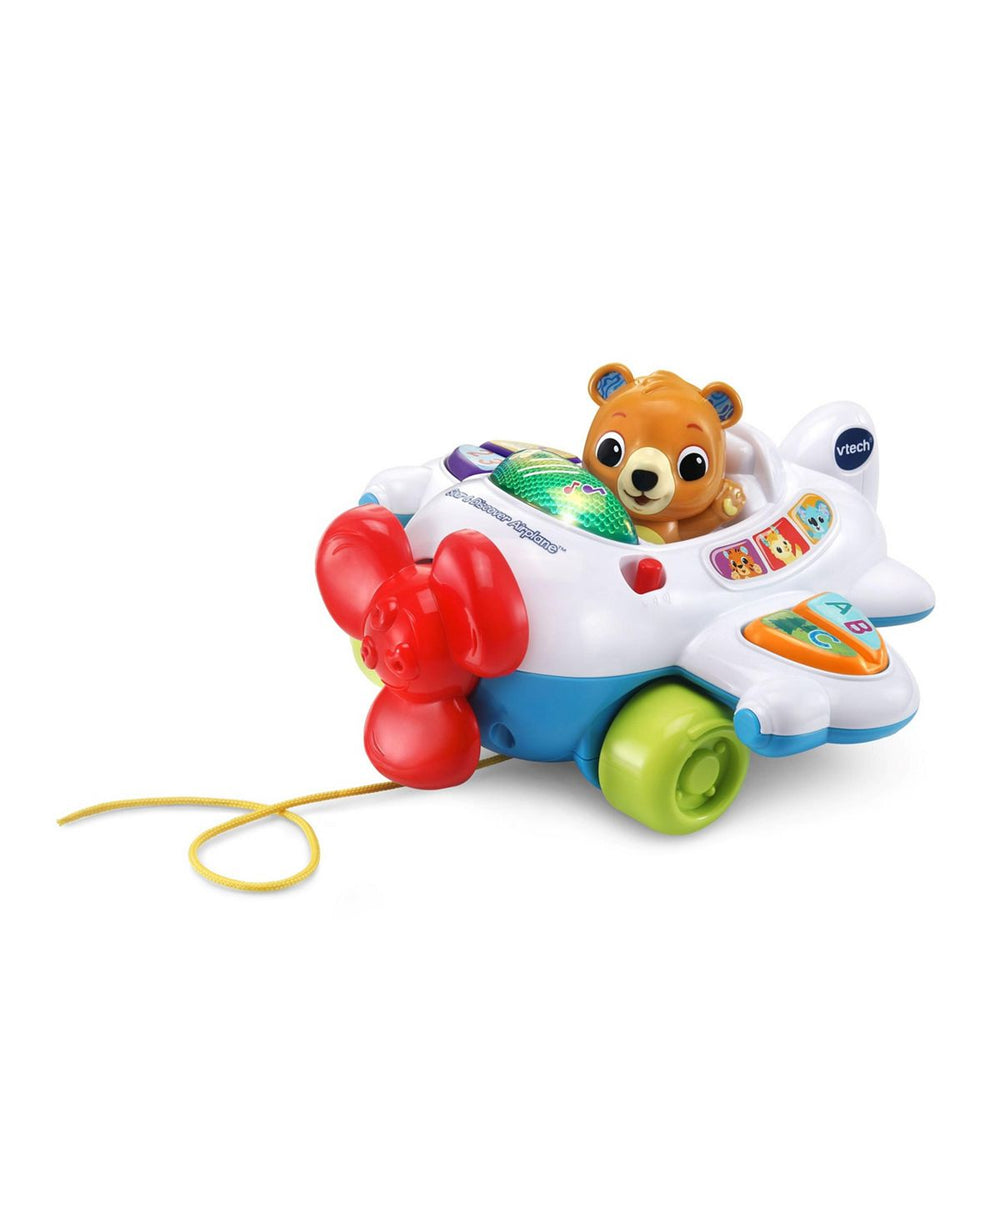 VTech Soar & Discover Interactive Musical Plane Toy